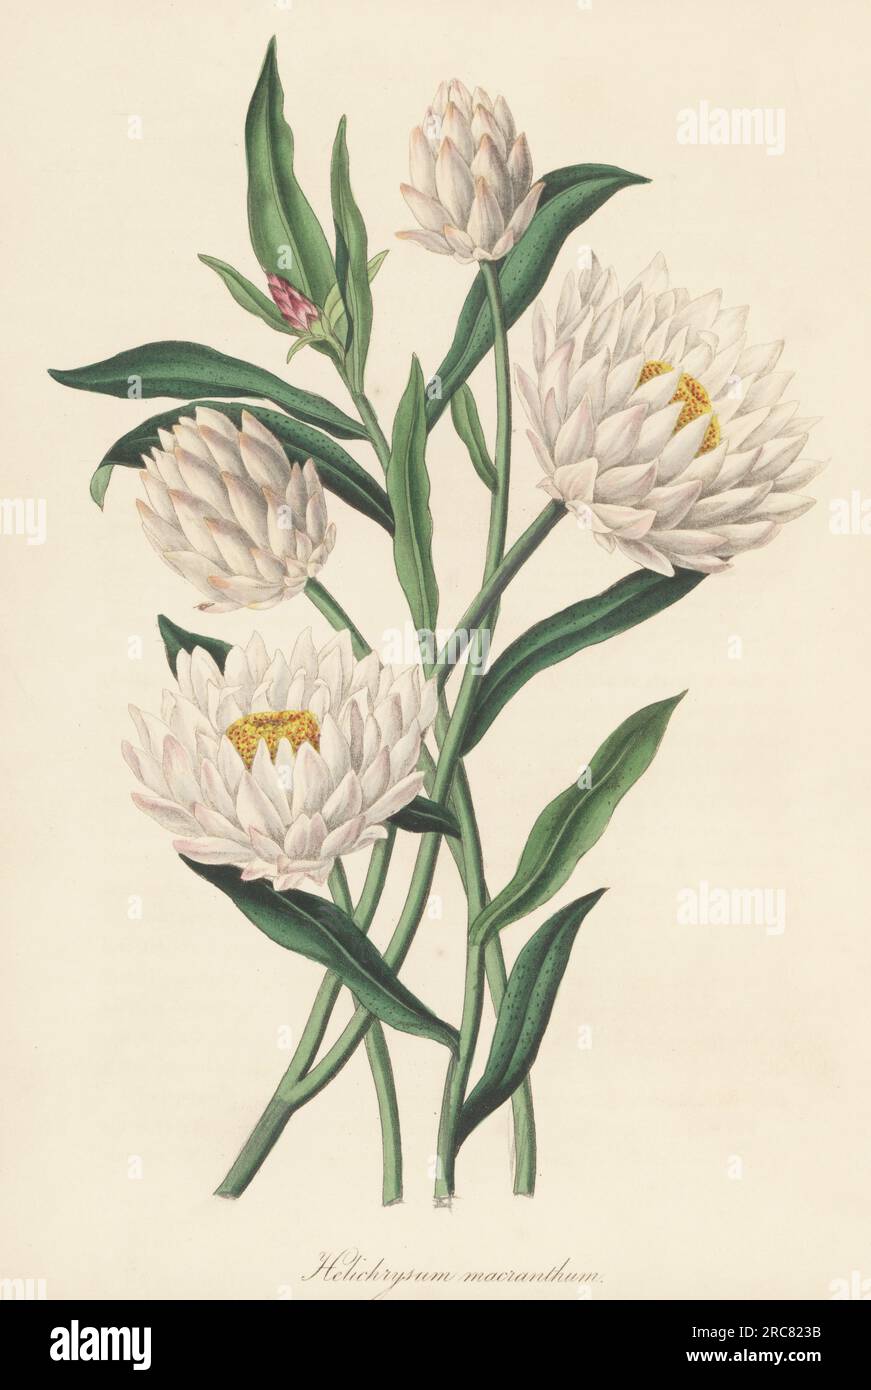 Strawflower, Xerochrysum macranthum. Native to the Swan River colony, Australia, introduced to England by Captain James Mangles, R.N. Large-flowered helichrysum, Helichrysum macranthum. Handcoloured lithograph from Joseph Paxton’s Magazine of Botany, and Register of Flowering Plants, Volume 5, Orr and Smith, London, 1838. Stock Photo